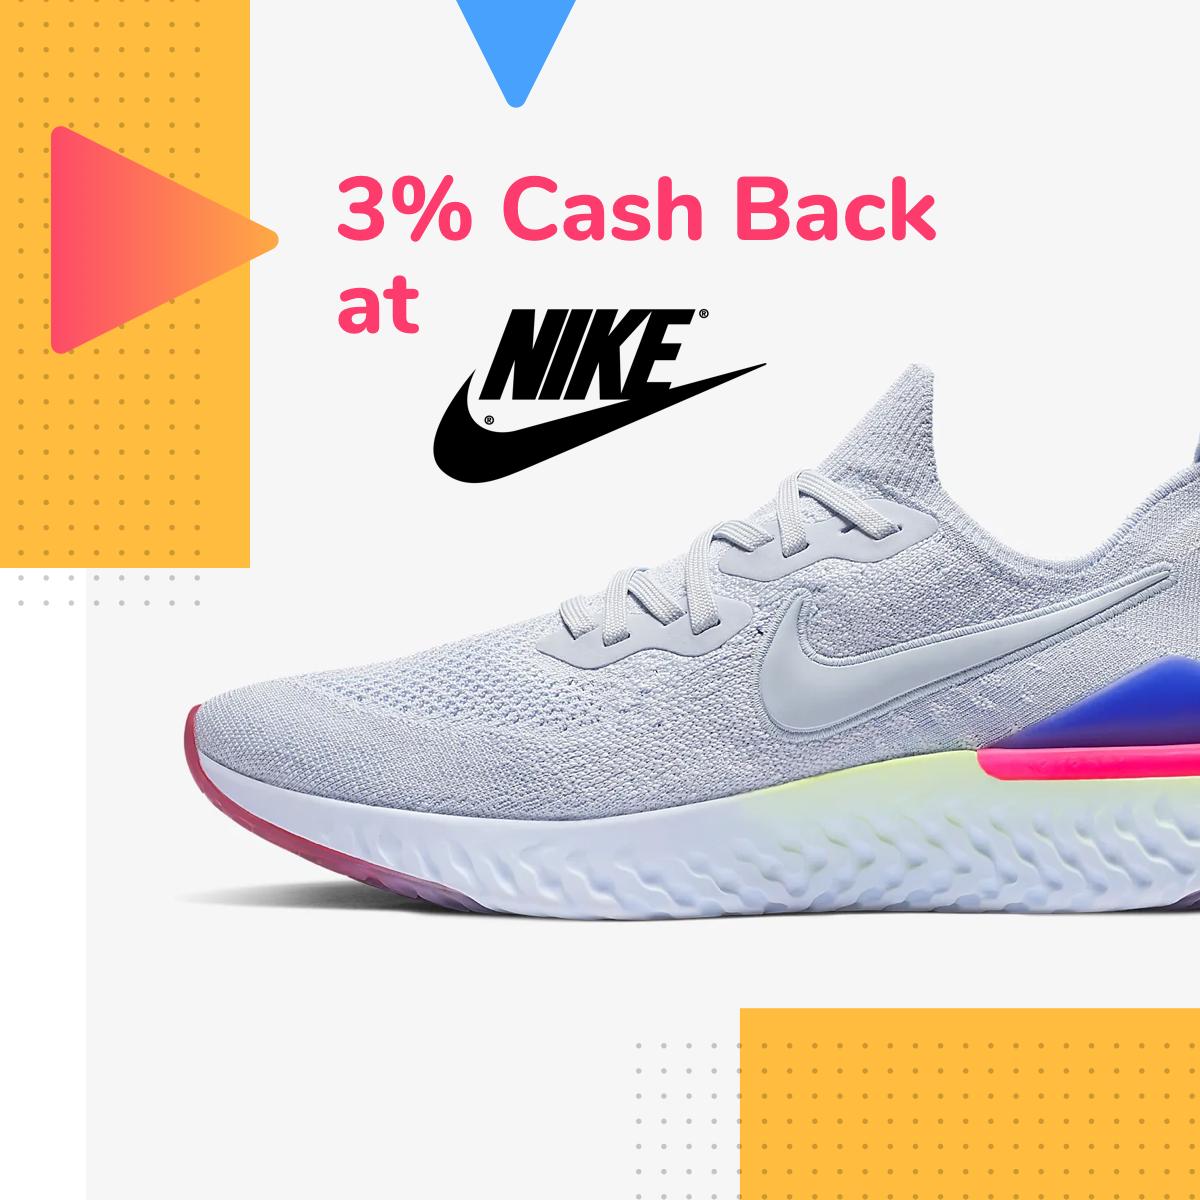 Coupons Com On Twitter The Kids Need New Shoessss And Why Not Earn Yourself Some Cash Back For Getting Them Earn Up To 3 Cash Back At Nike When You Shop Online